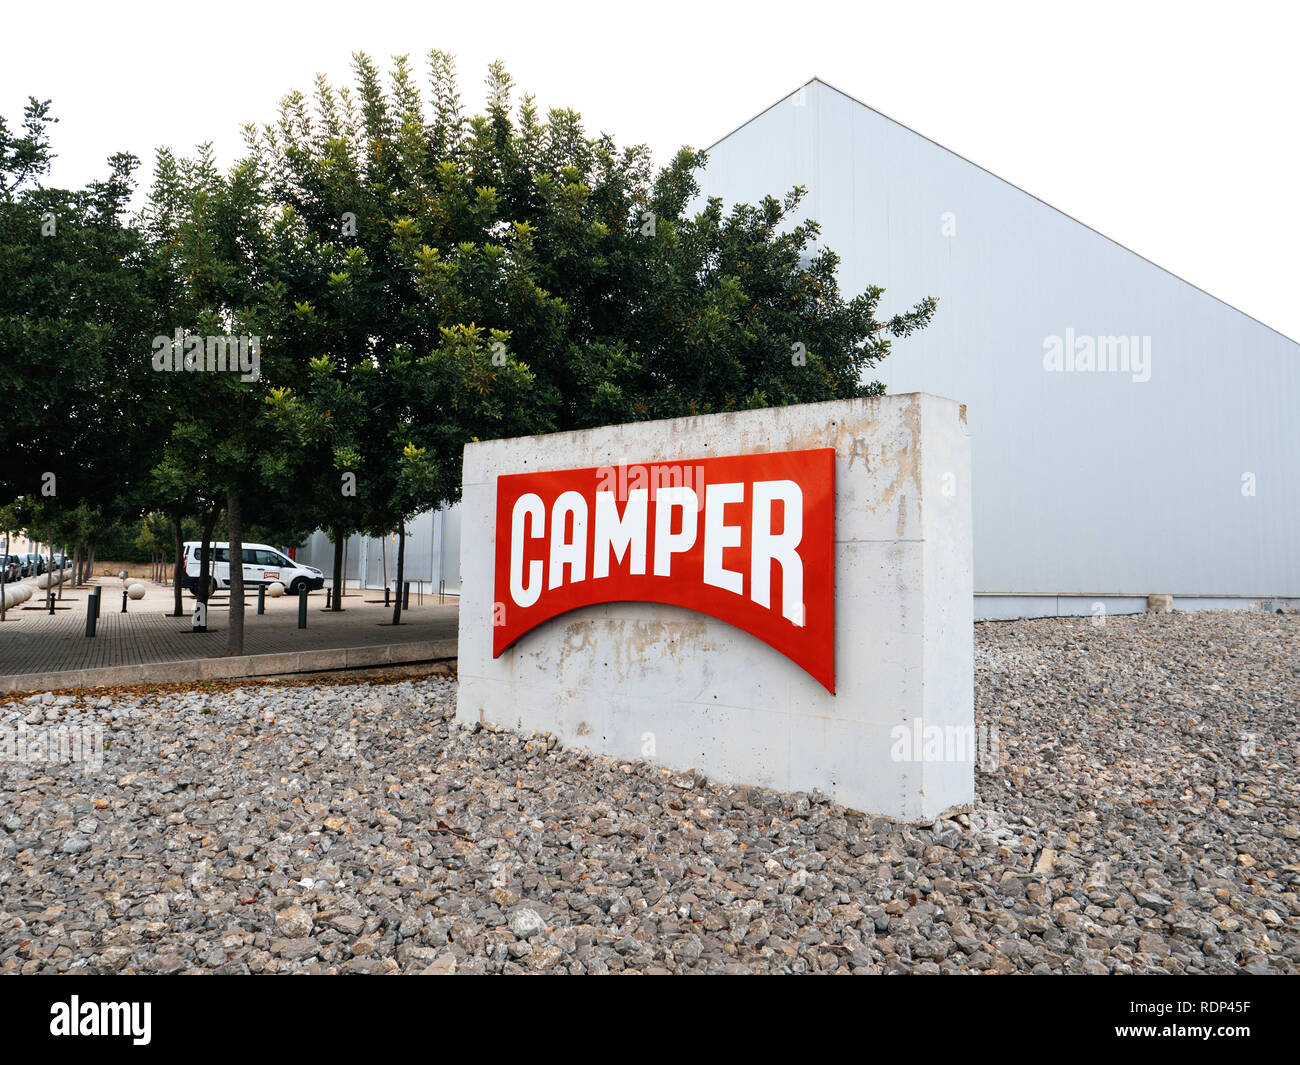 Camper Shoes High Resolution Stock Photography and Images - Alamy